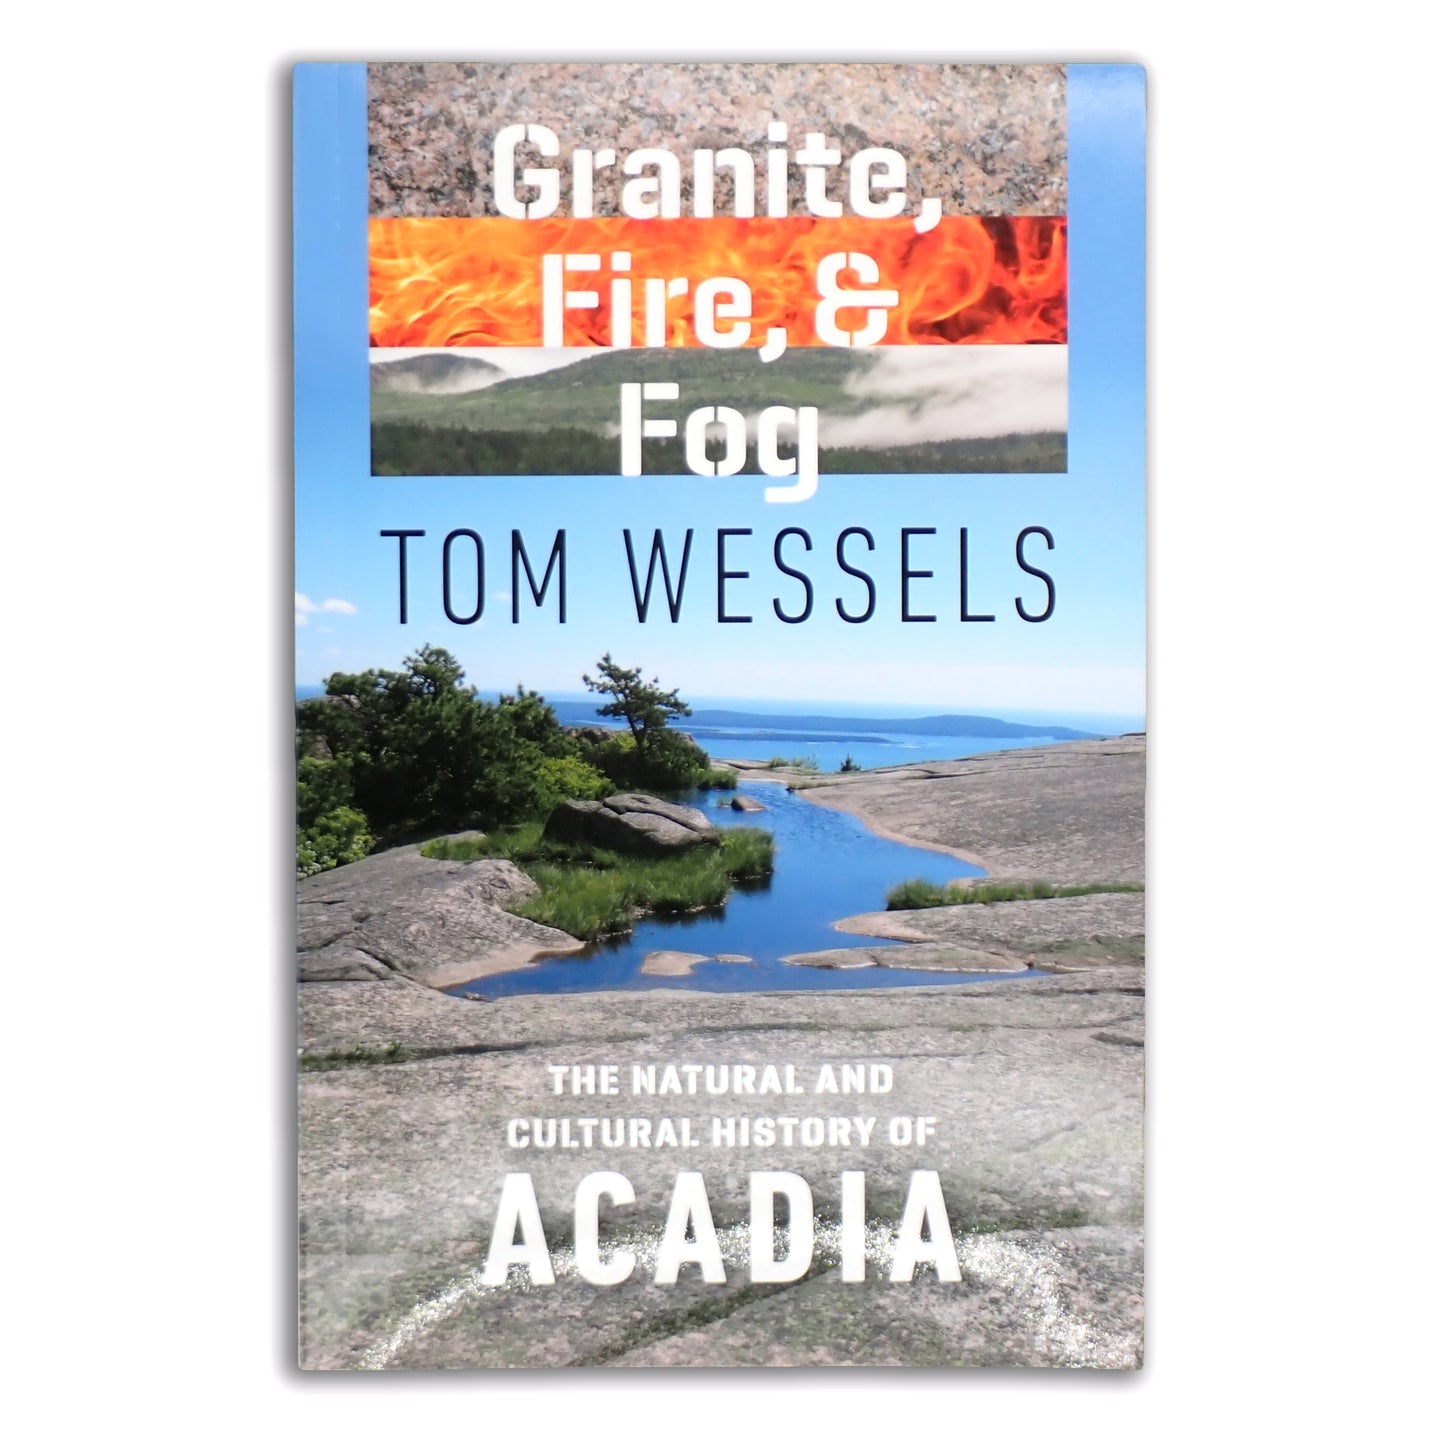 Granite, Fire, & Fog: The Natural and Cultural History of Acadia - Tom Wessels (paperback)